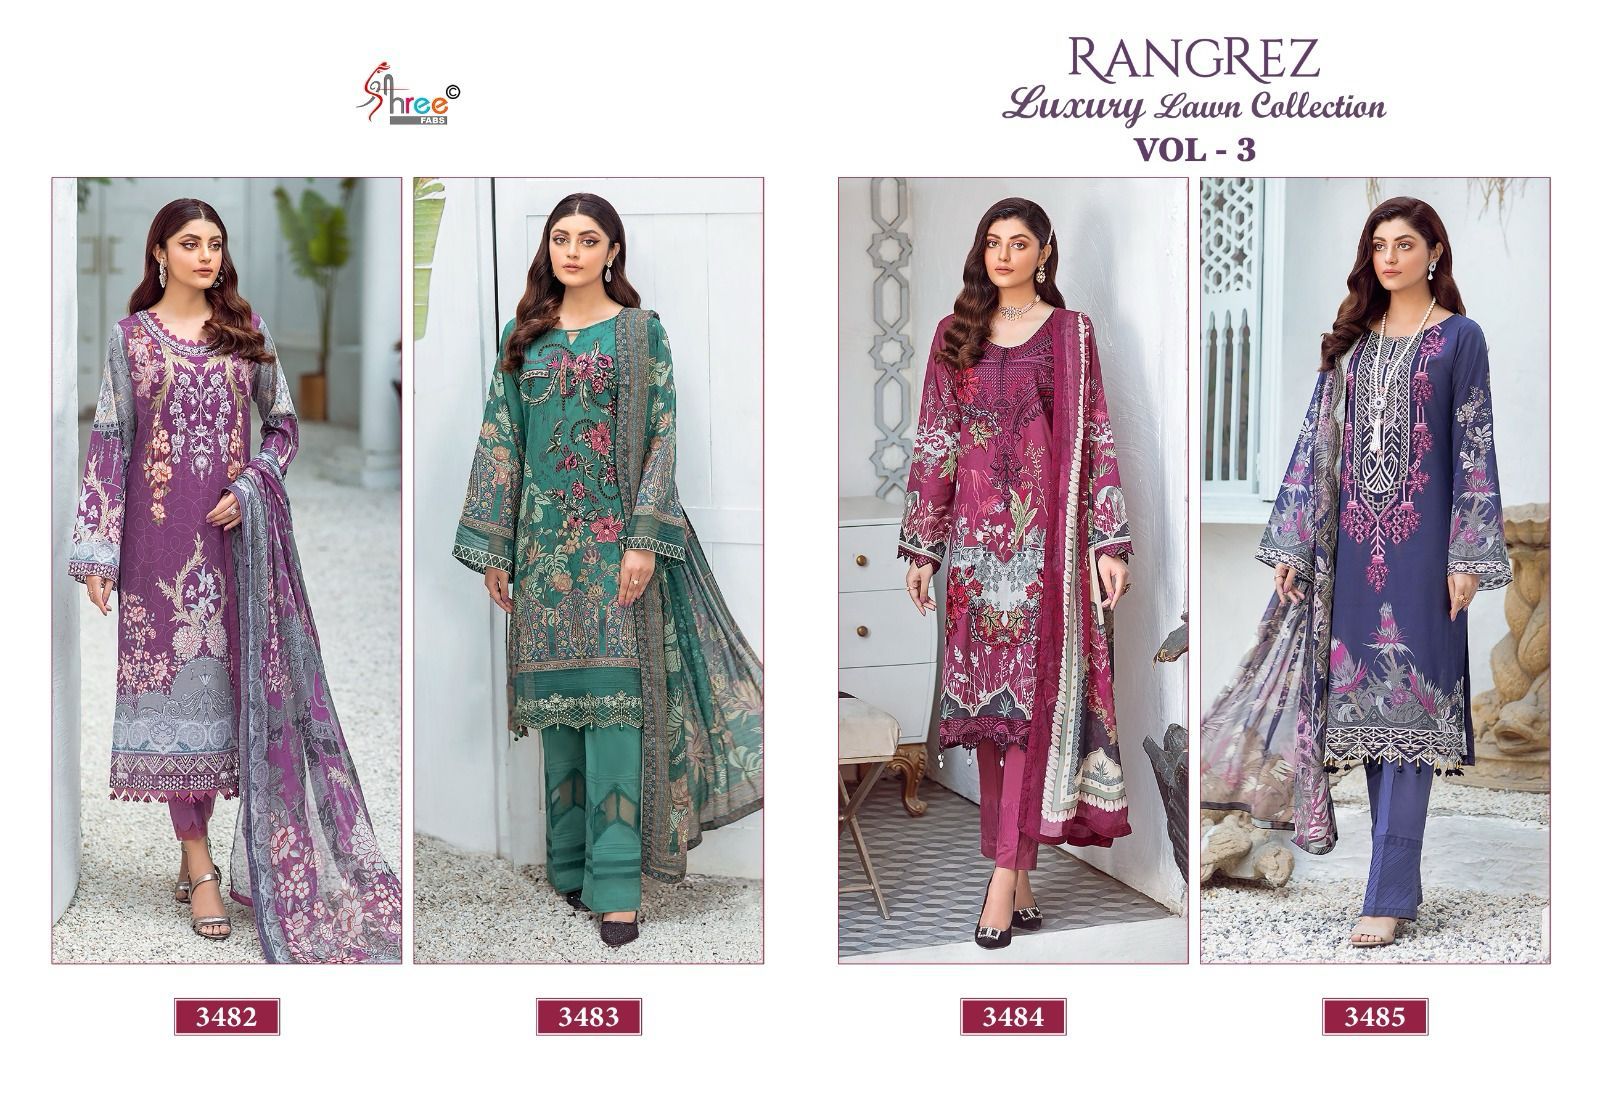 Shree Rangrez Luxury Lawn Collection Vol 3 collection 2